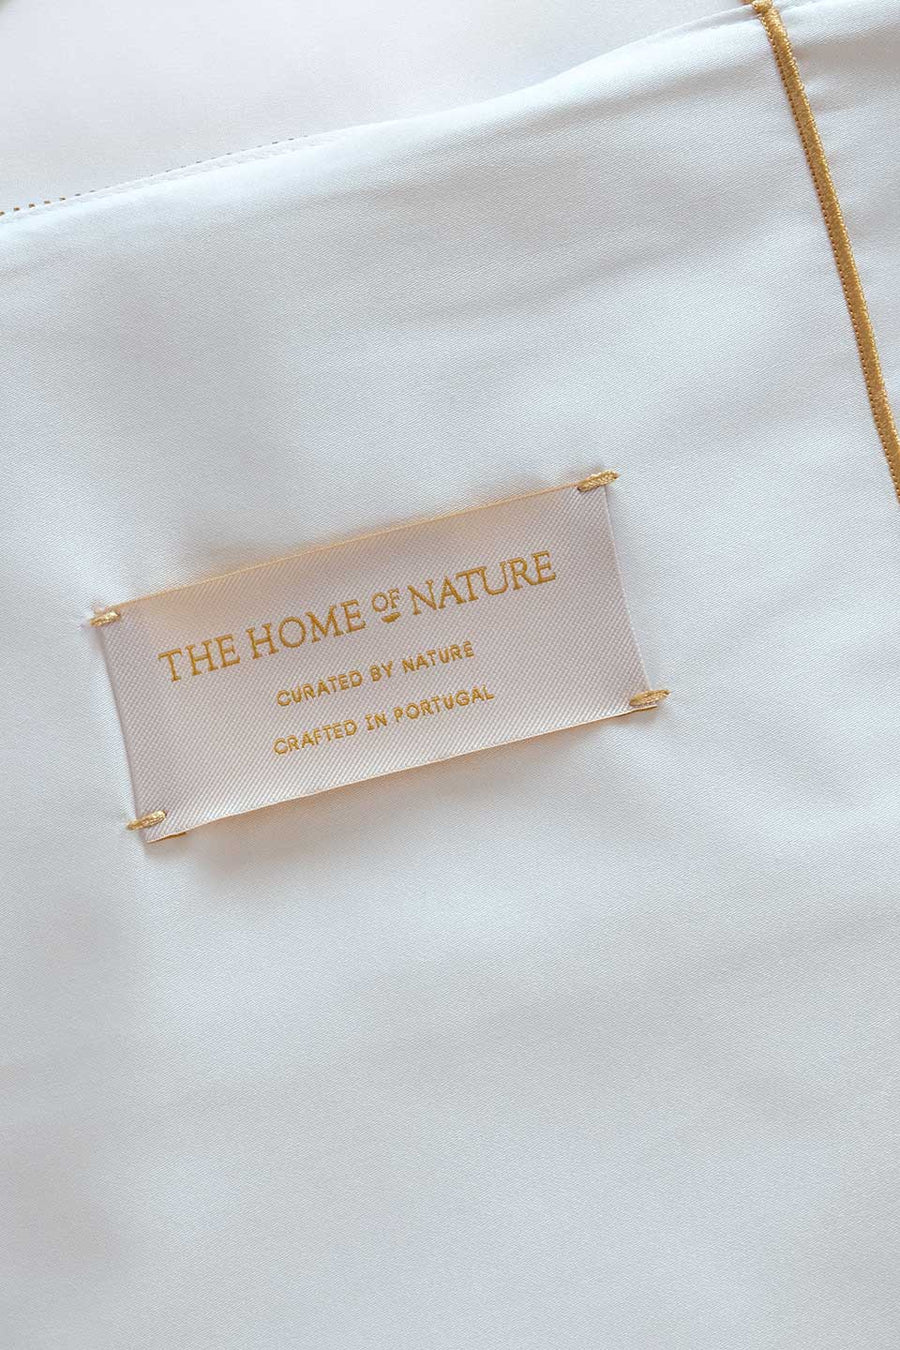 Label from The Nature Home on a white Egyptian Cotton™ Sateen eco-friendly packaging.